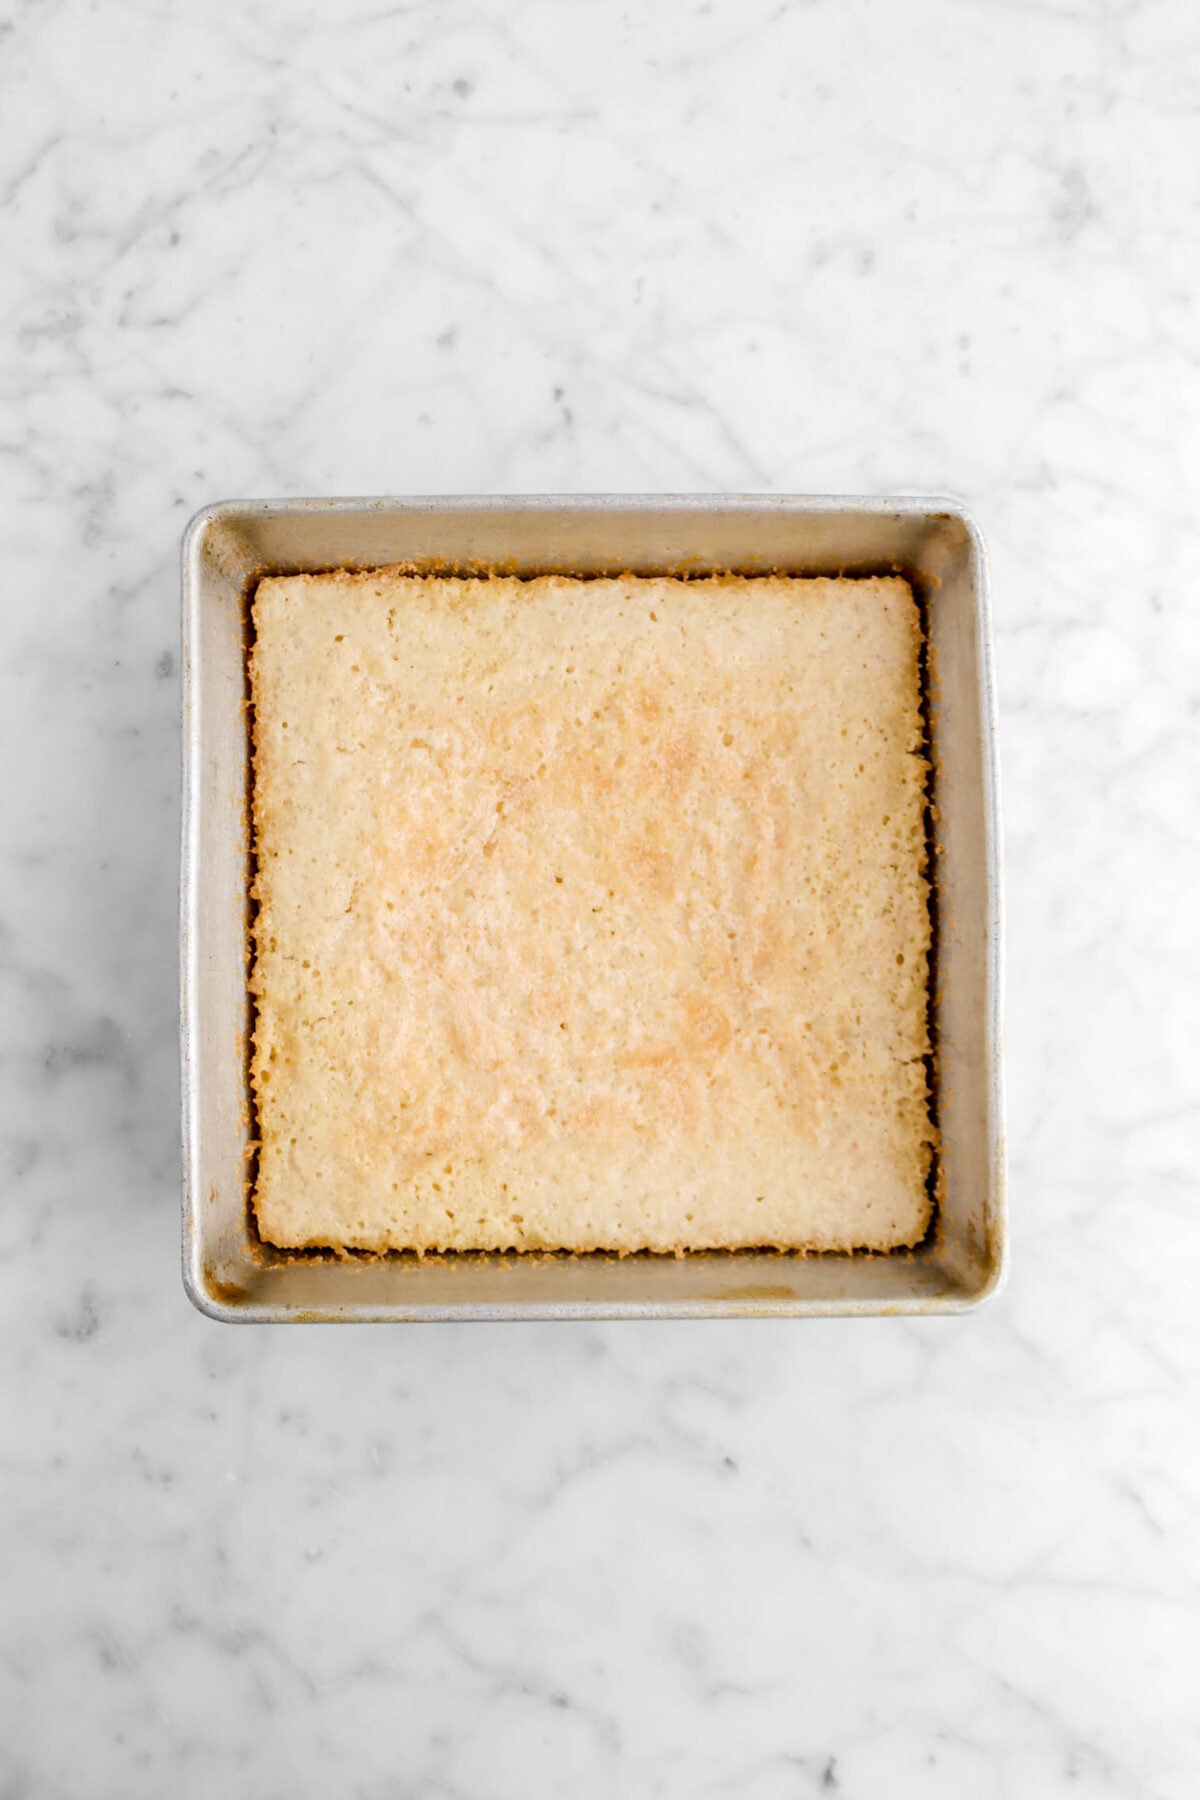 baked cake in square pan